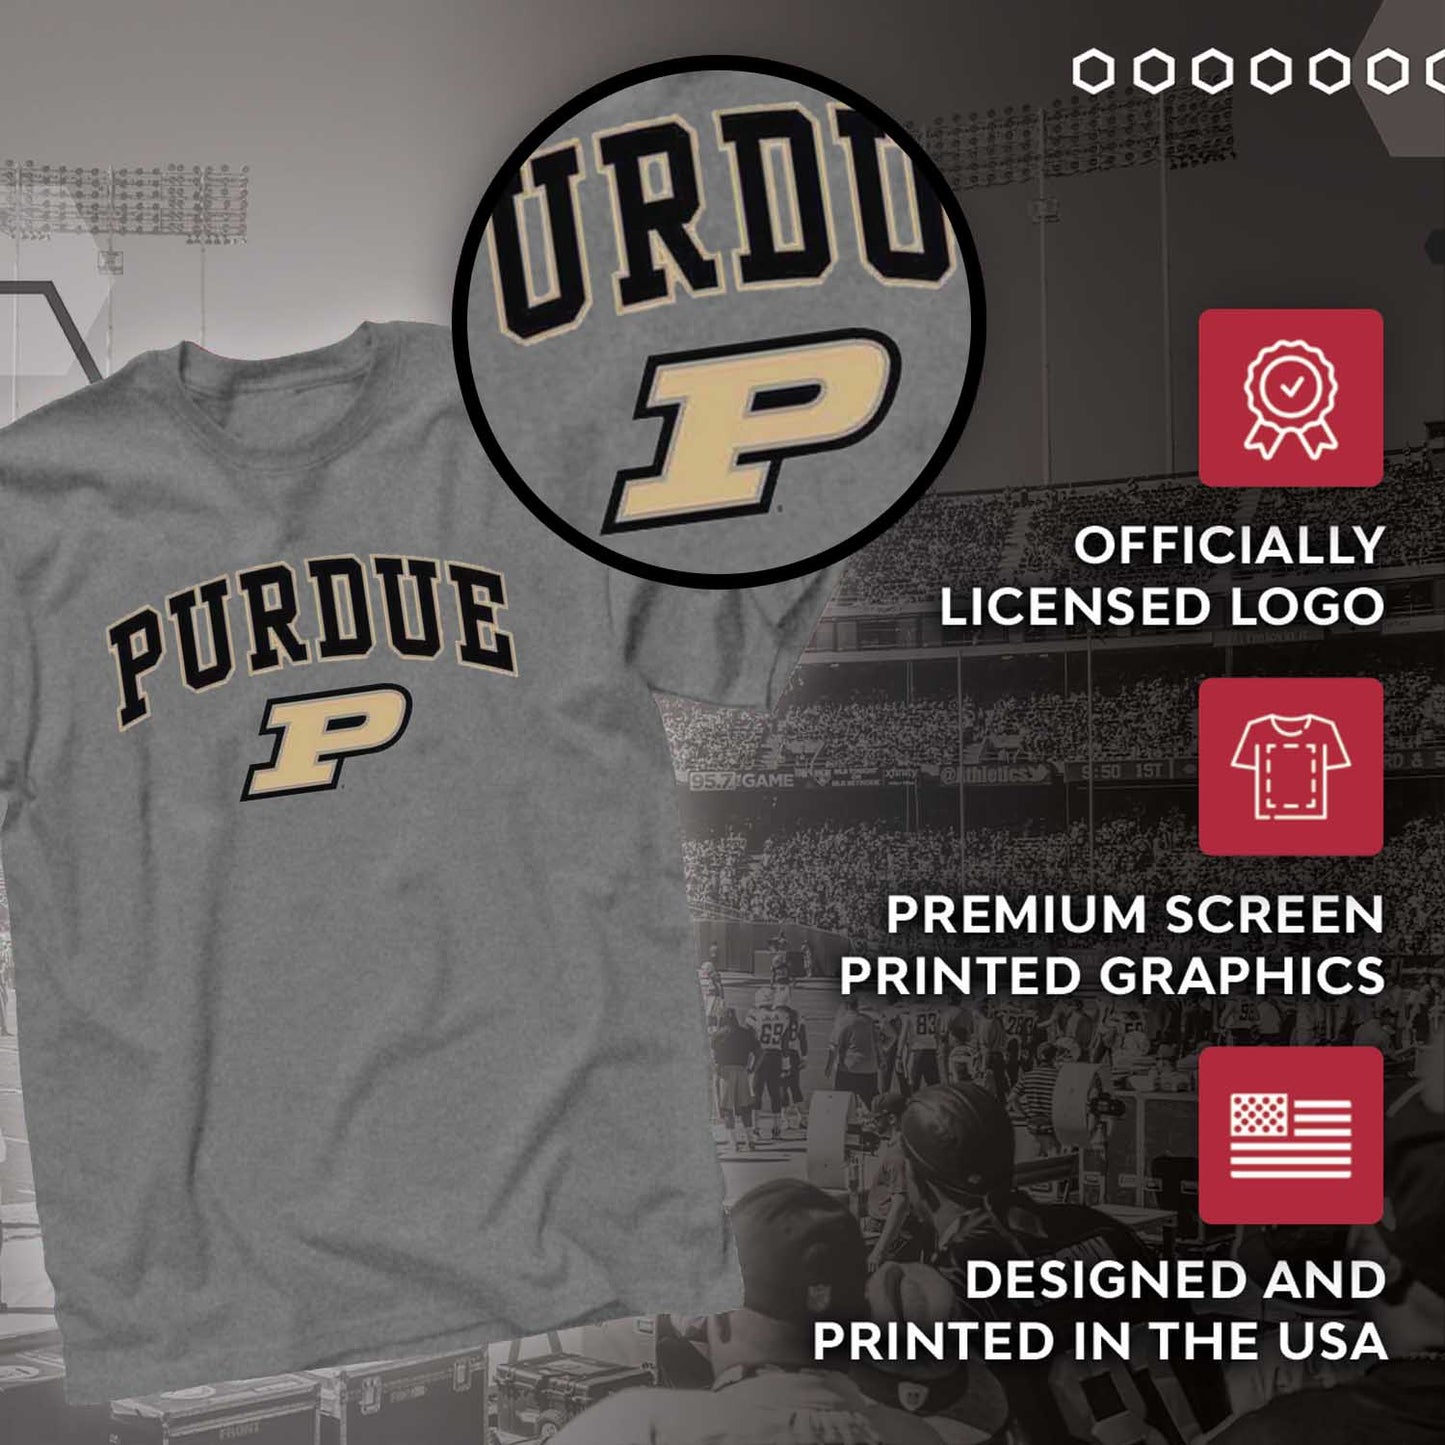 Purdue Boilermakers NCAA Adult Gameday Cotton T-Shirt - Gray